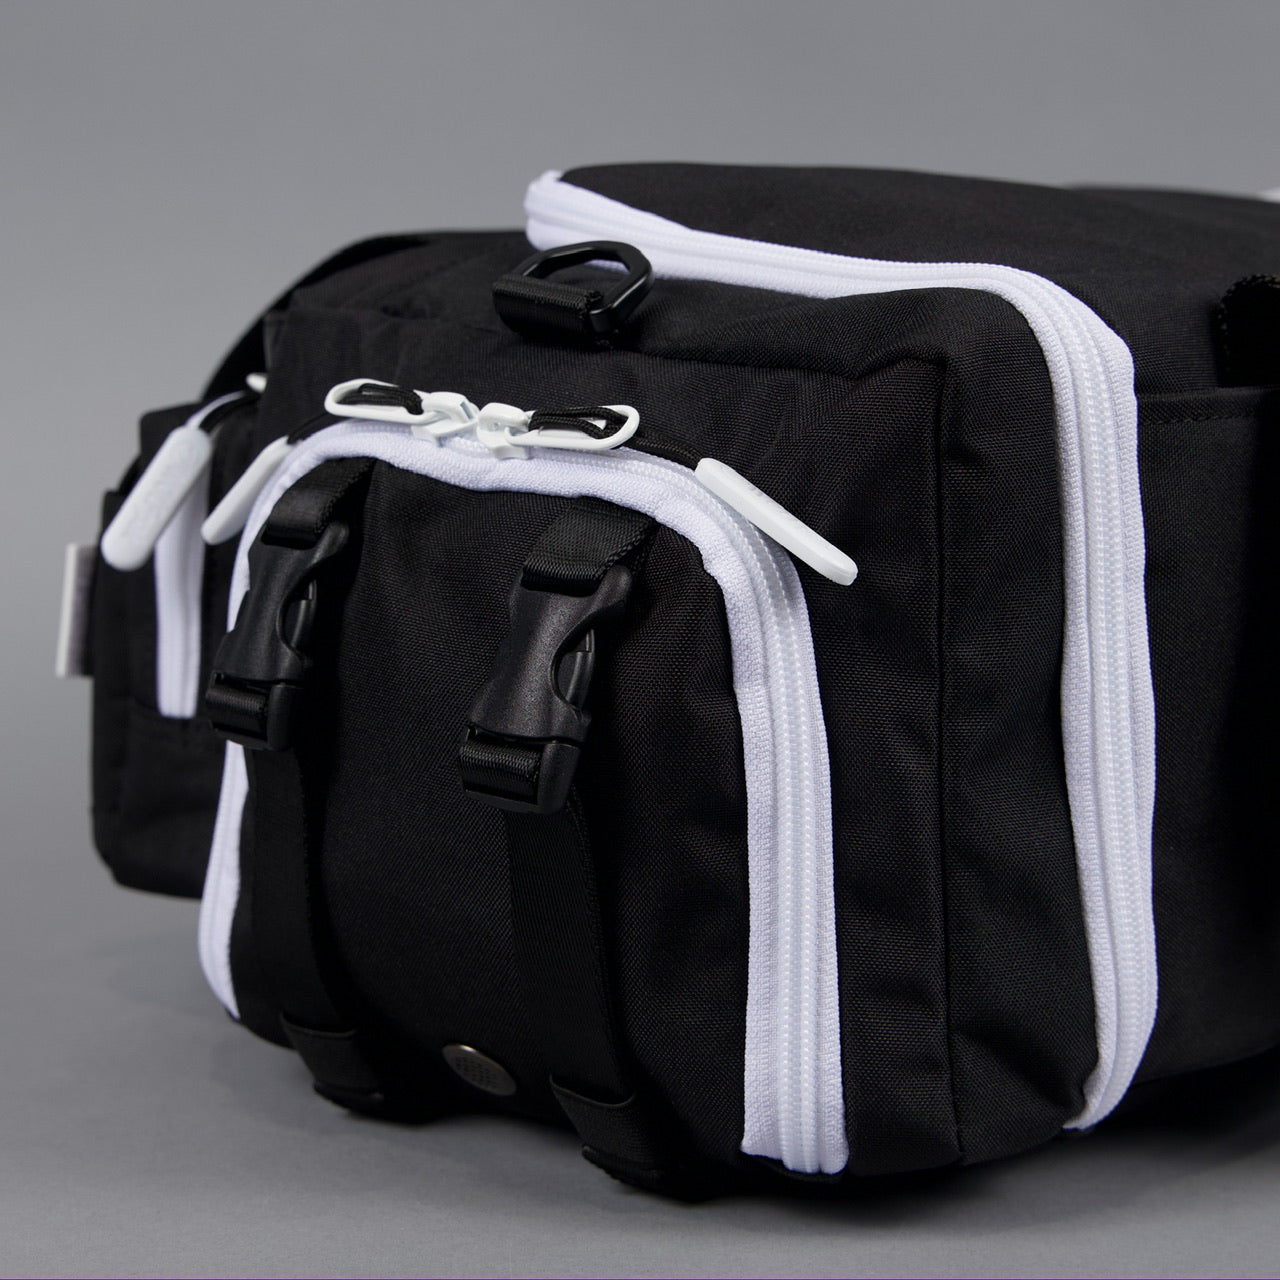 20L Mini Duffle Bag Black with White Accents